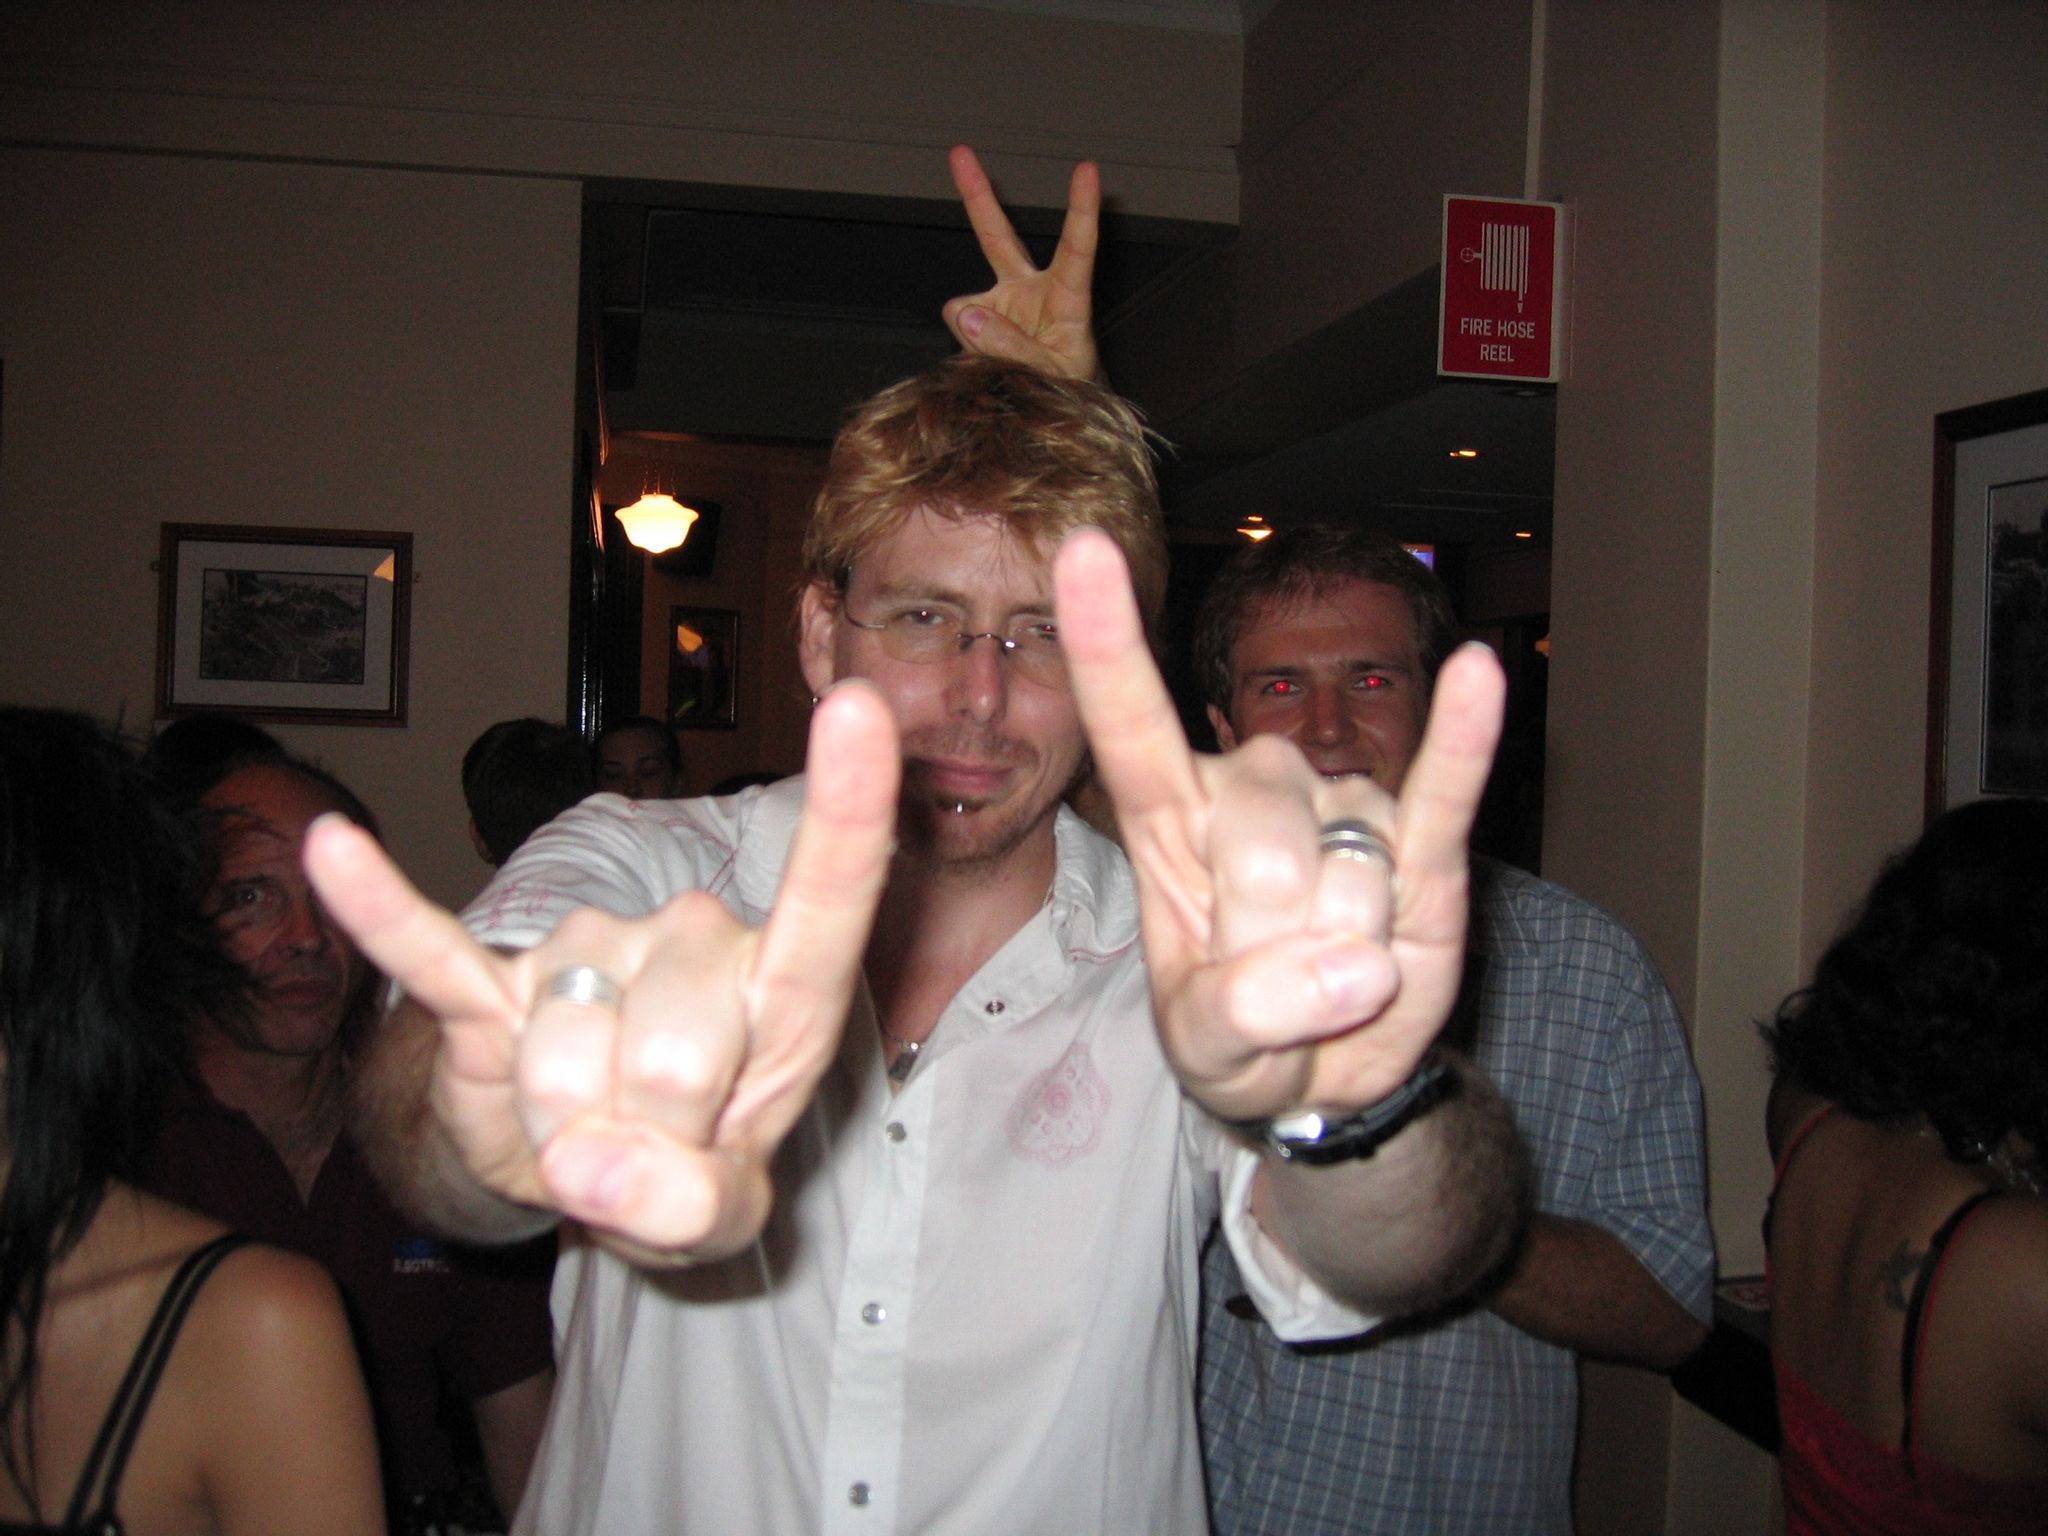 A photo of a man throwing the horns with both hands.